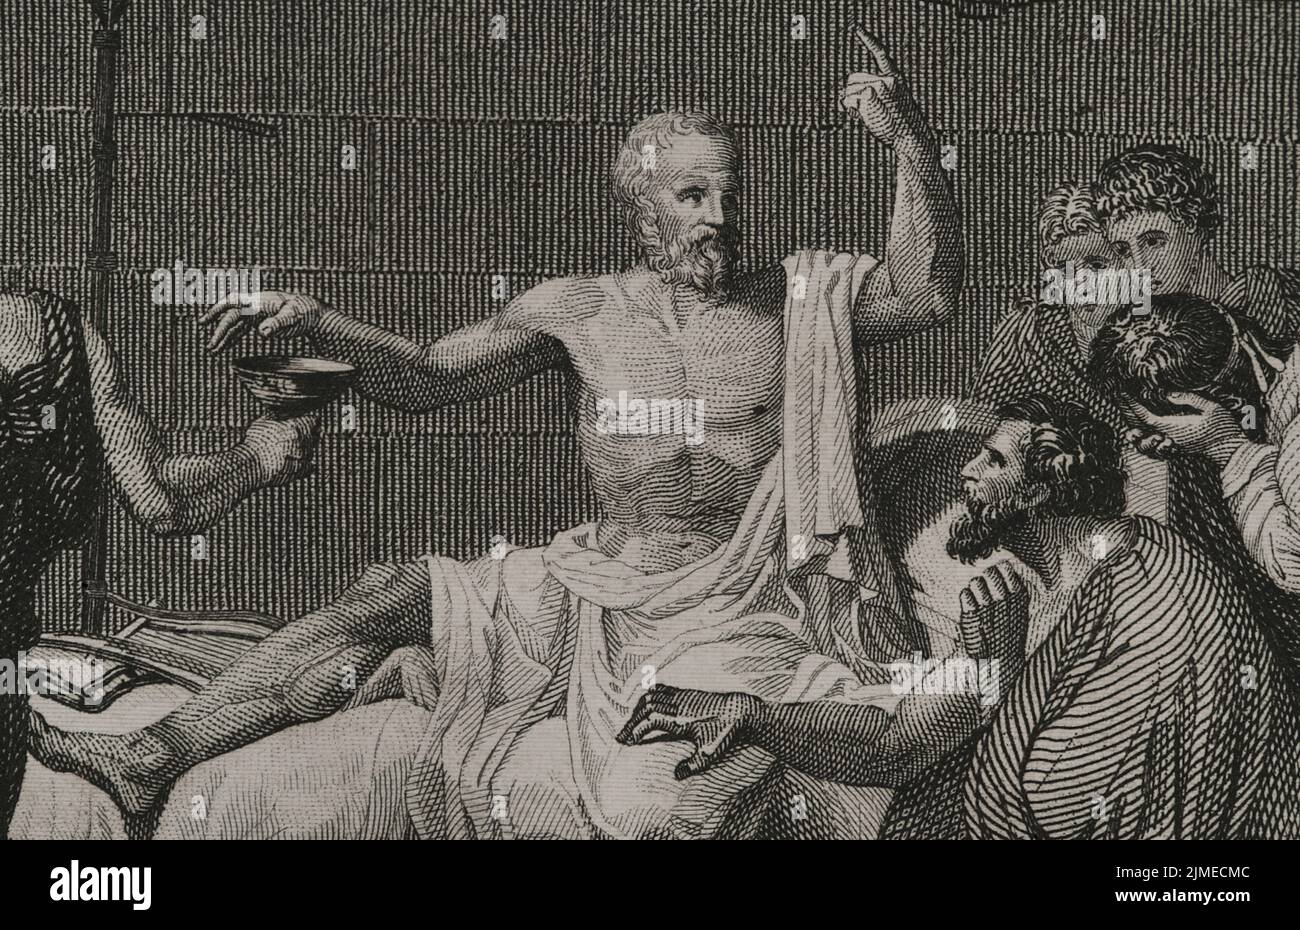 Socrates (ca. 470 BC - 399 BC). Greek philosopher. Accused of corrupting the youth, he was condemned to death by the Heliaia (Supreme Court of Ancient Athens). Death of Socrates. Detail of a engraving by A. Roca, based on the painting by Jacques-Louis David. 'Historia Universal', by César Cantú. Volume I, 1854. Author: Antonio Roca Sallent (1813-1864). Spanish engraver. Stock Photo